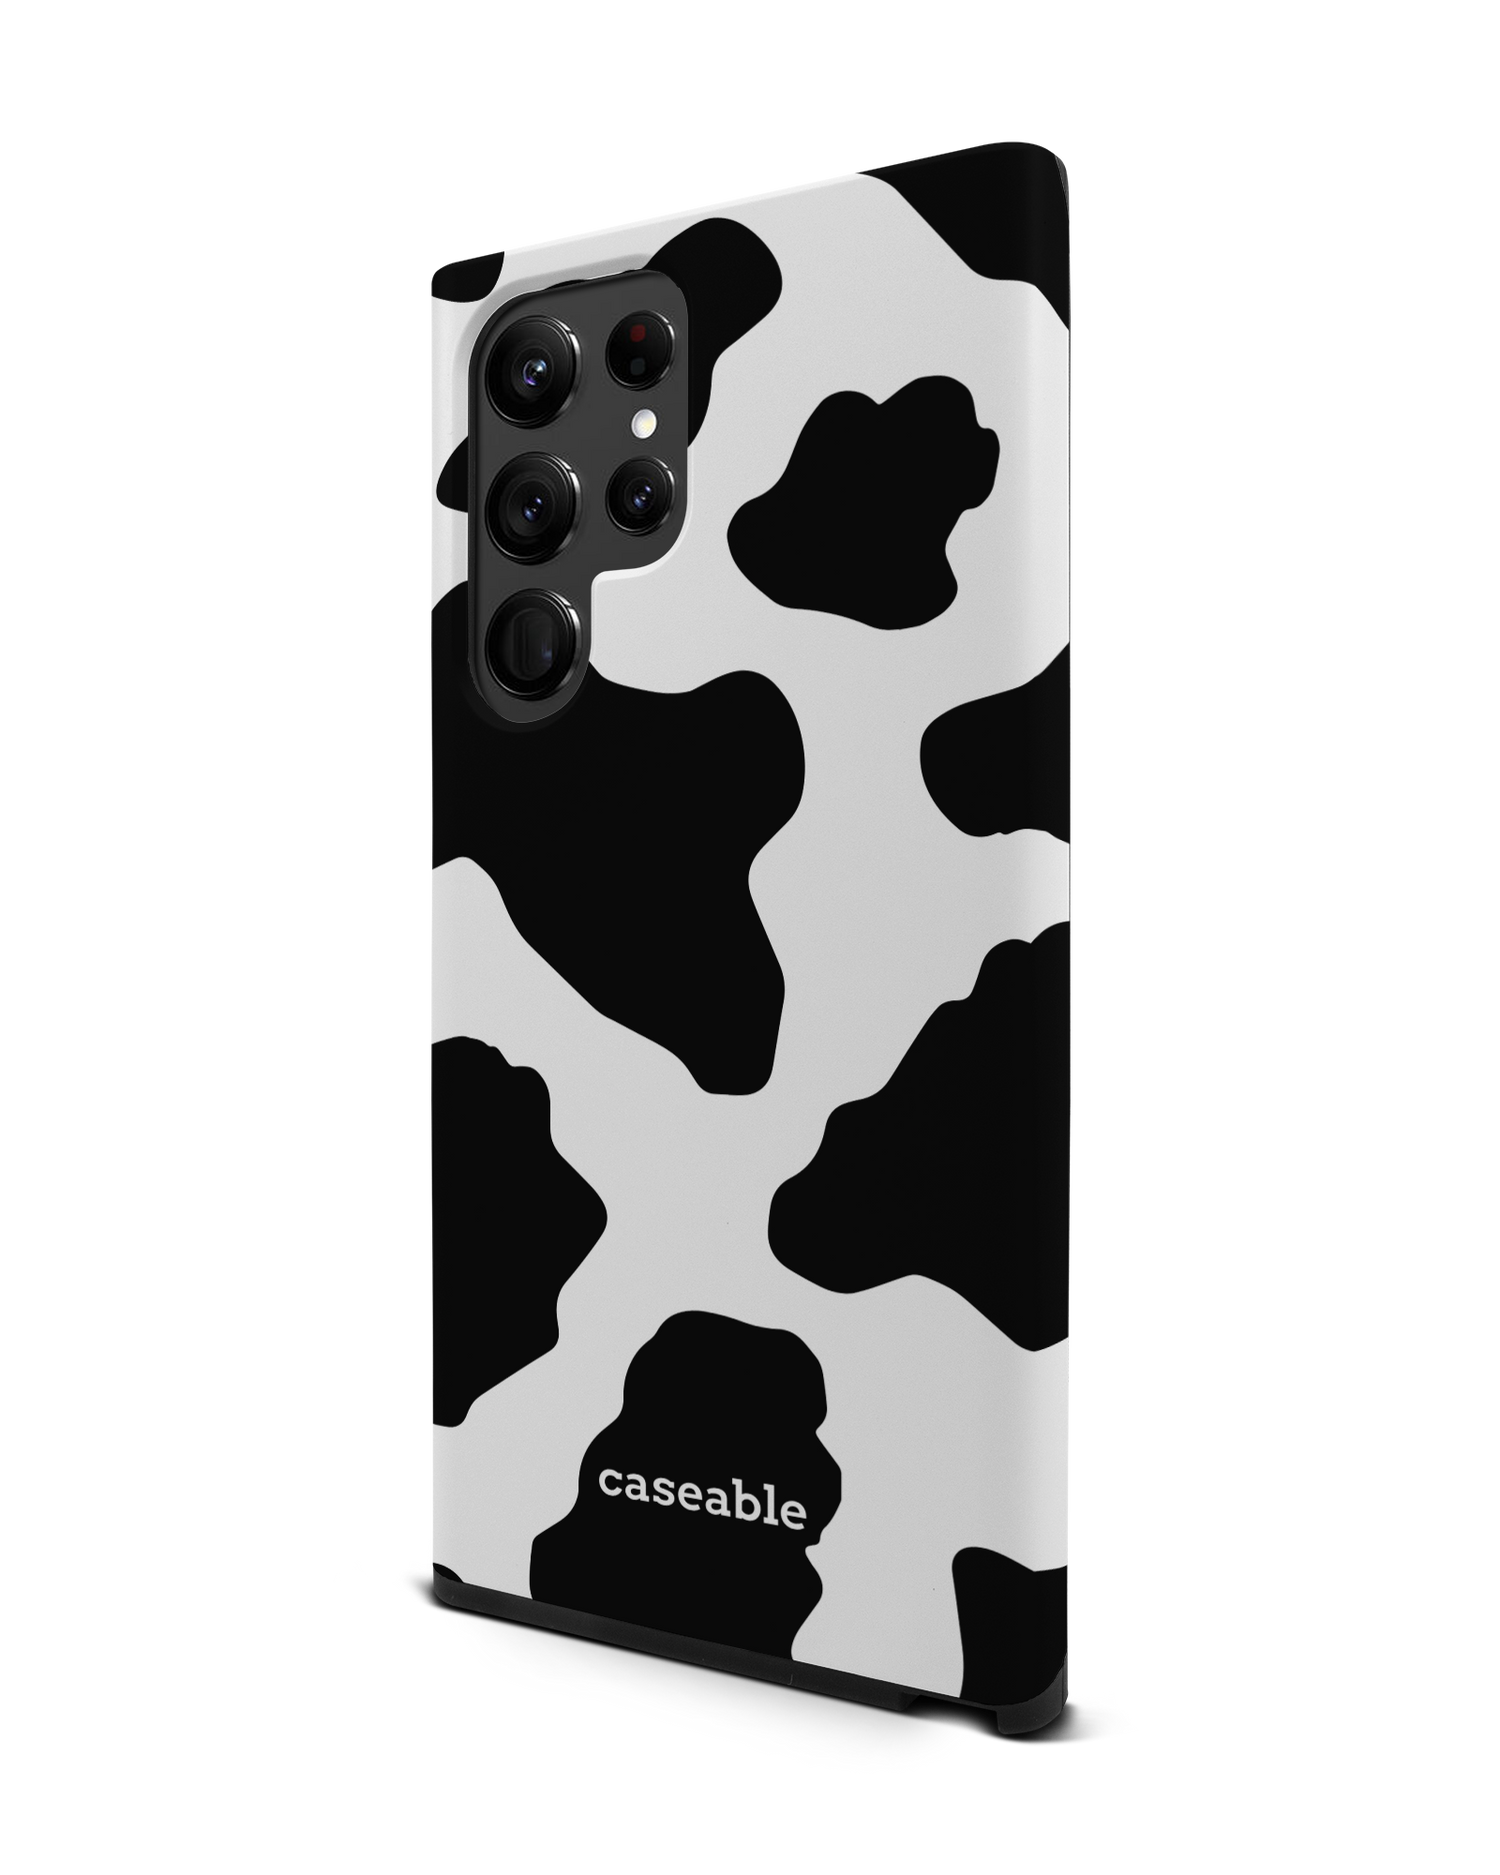 Cow Print 2 Premium Phone Case Samsung Galaxy S22 Ultra 5G: View from the right side